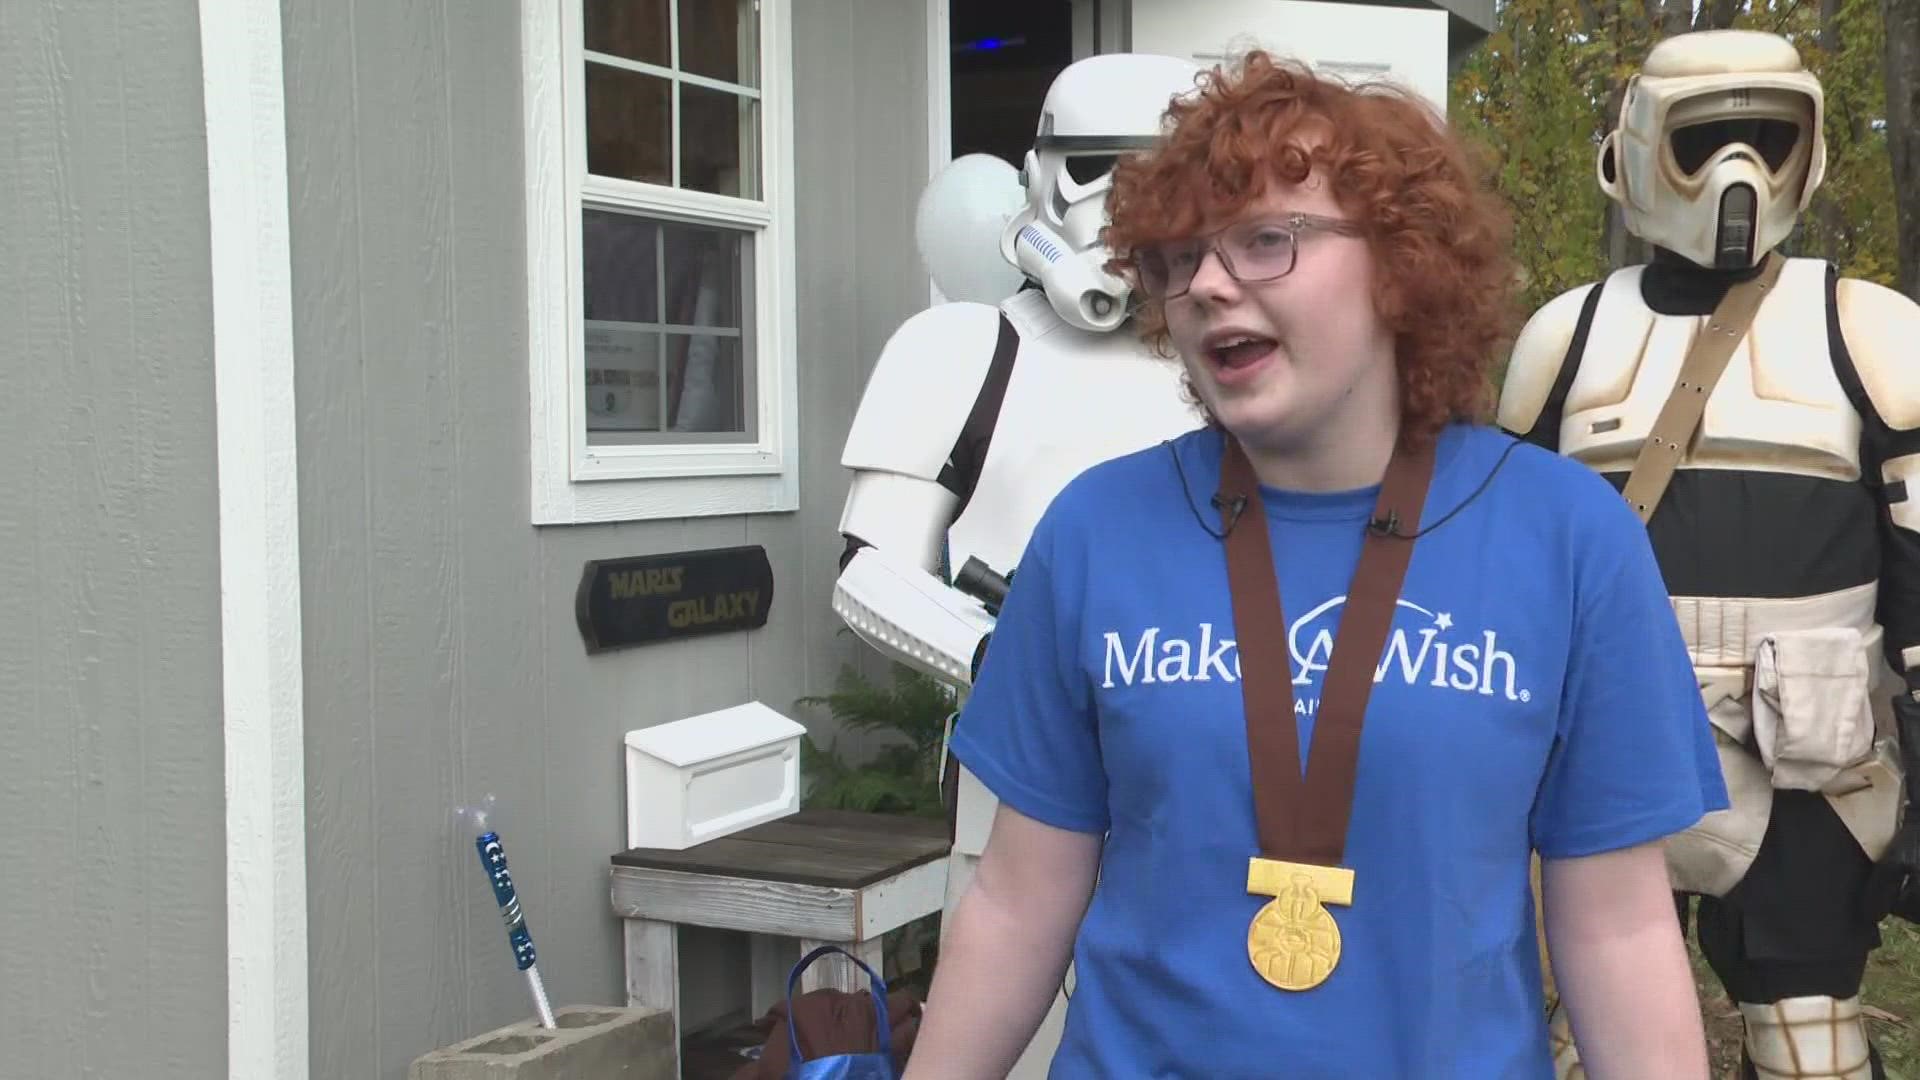 Through Make-A-Wish Maine, Mari Barnard was surprised with her own Star Wars-themed creative space